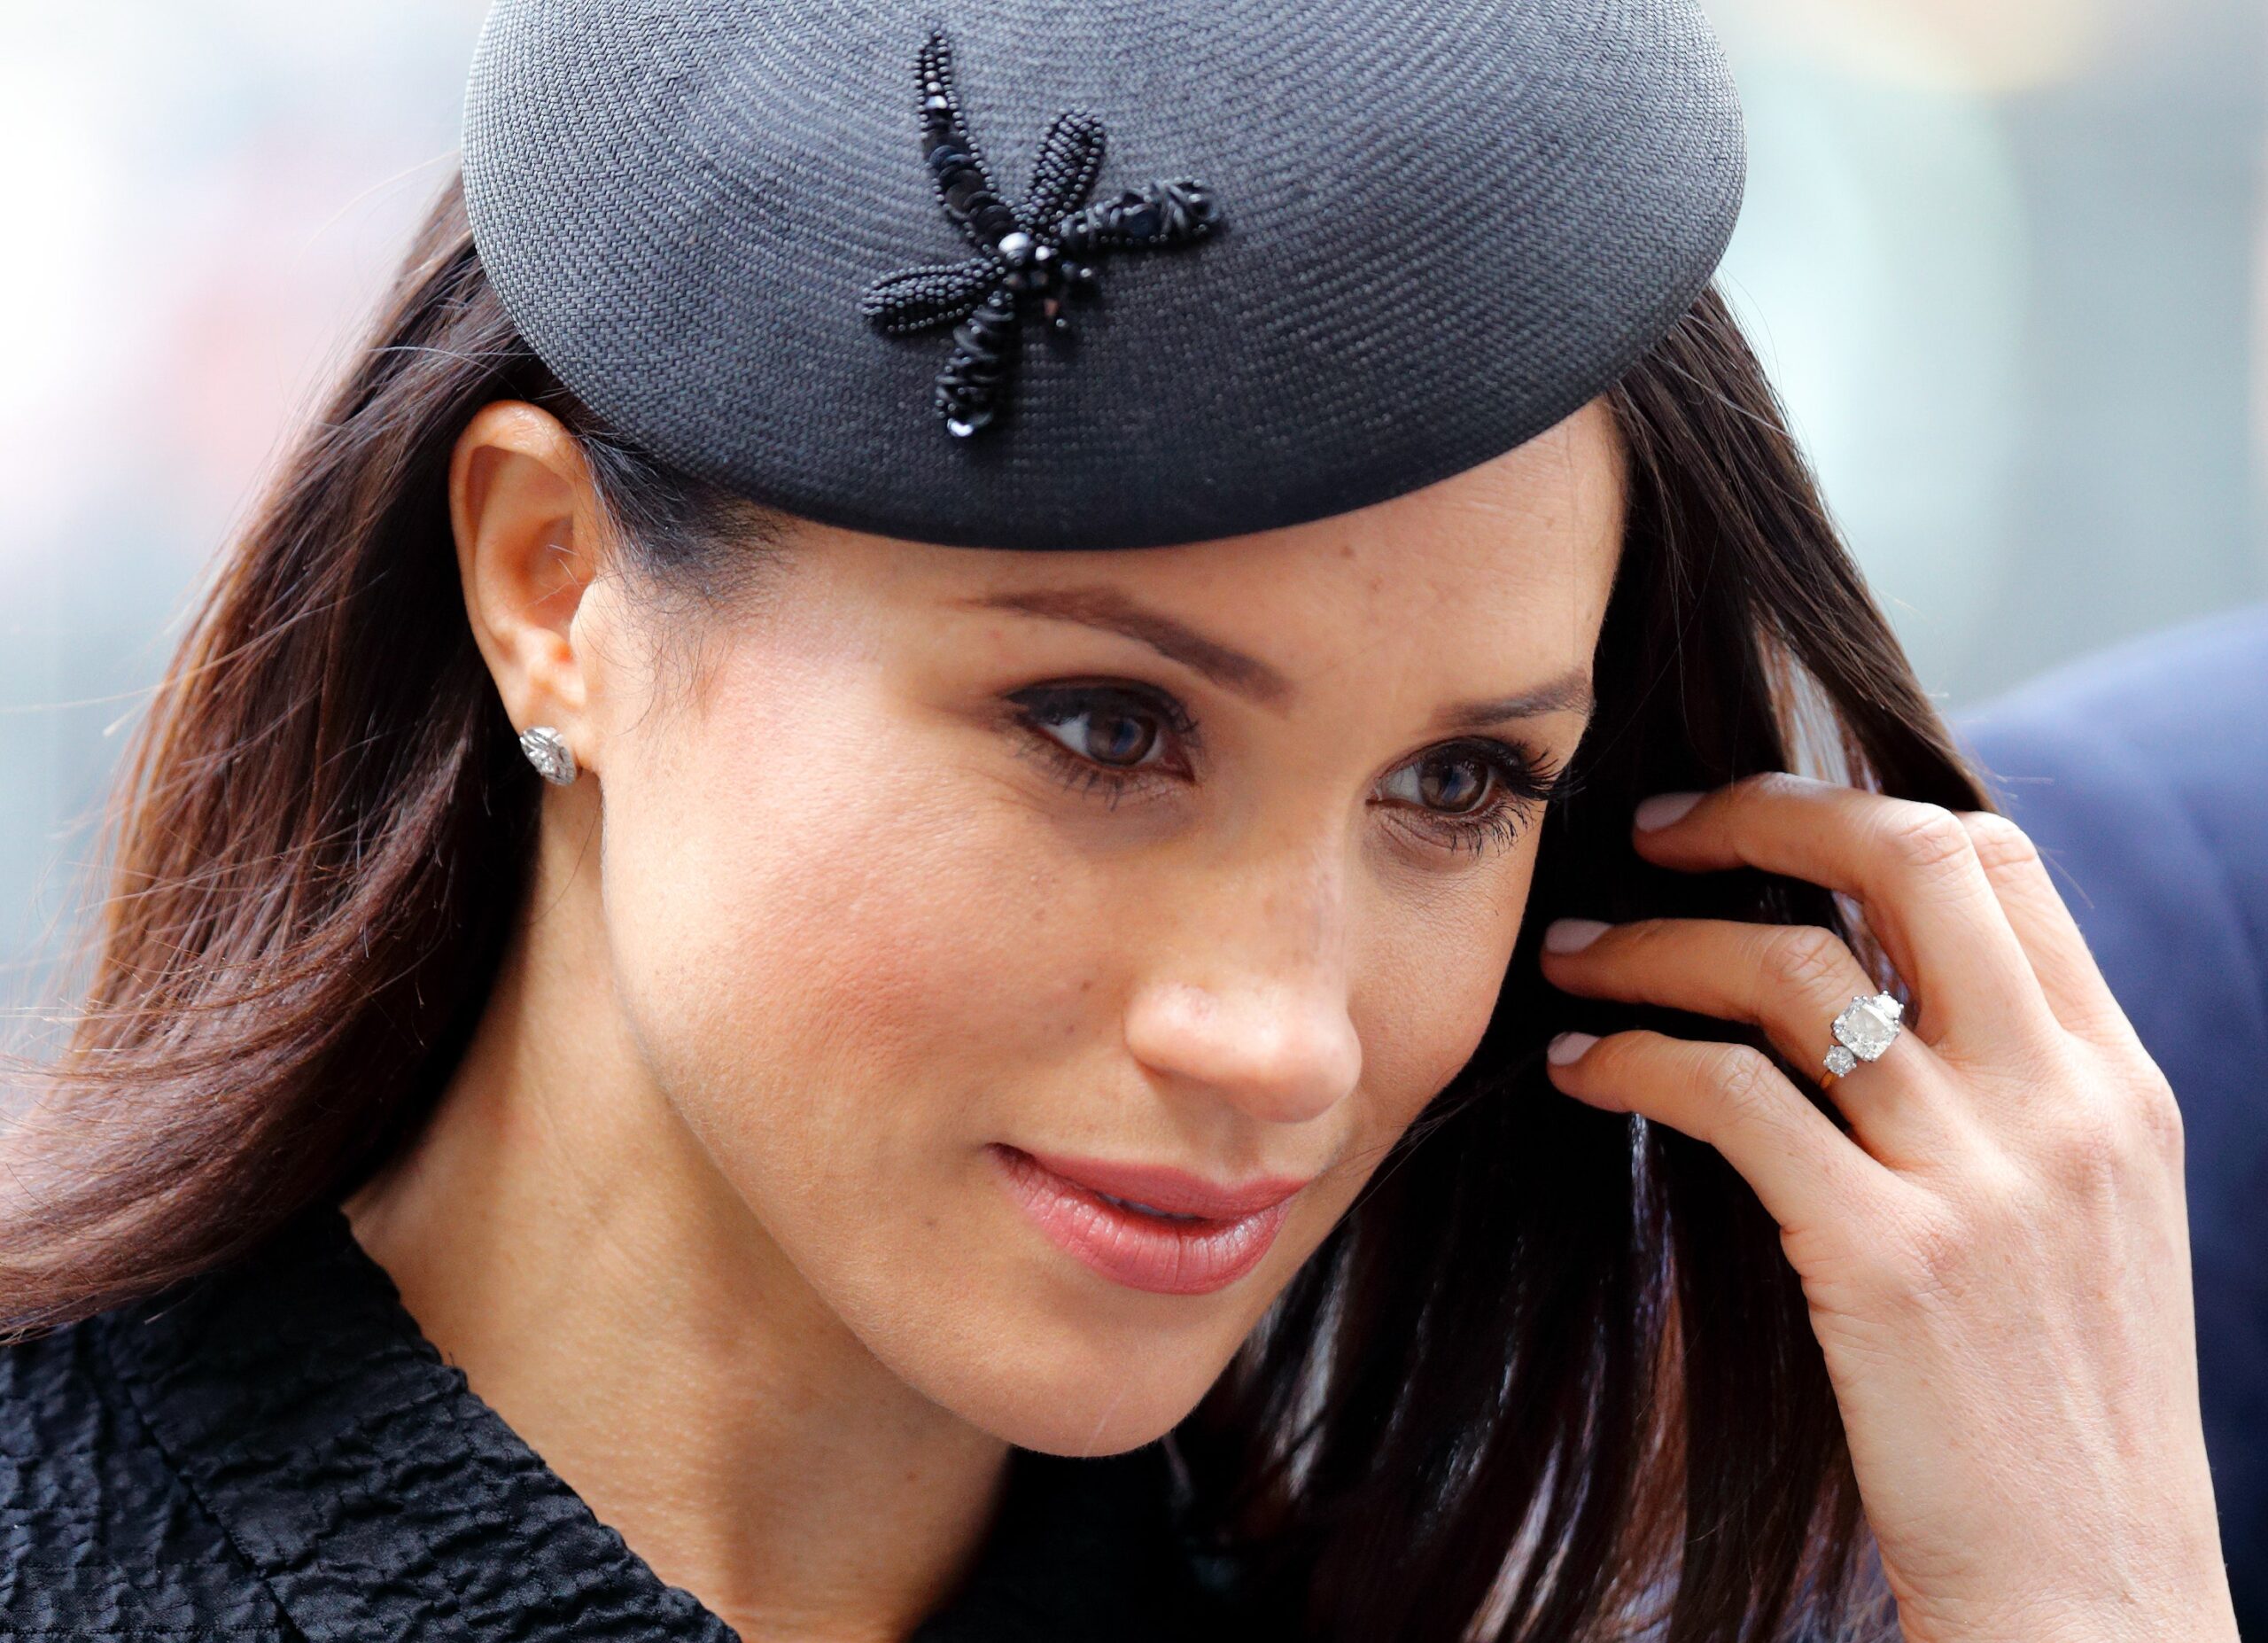 Meghan Markle Ditched Her Engagement Ring for a Disappointingly Normal Reason